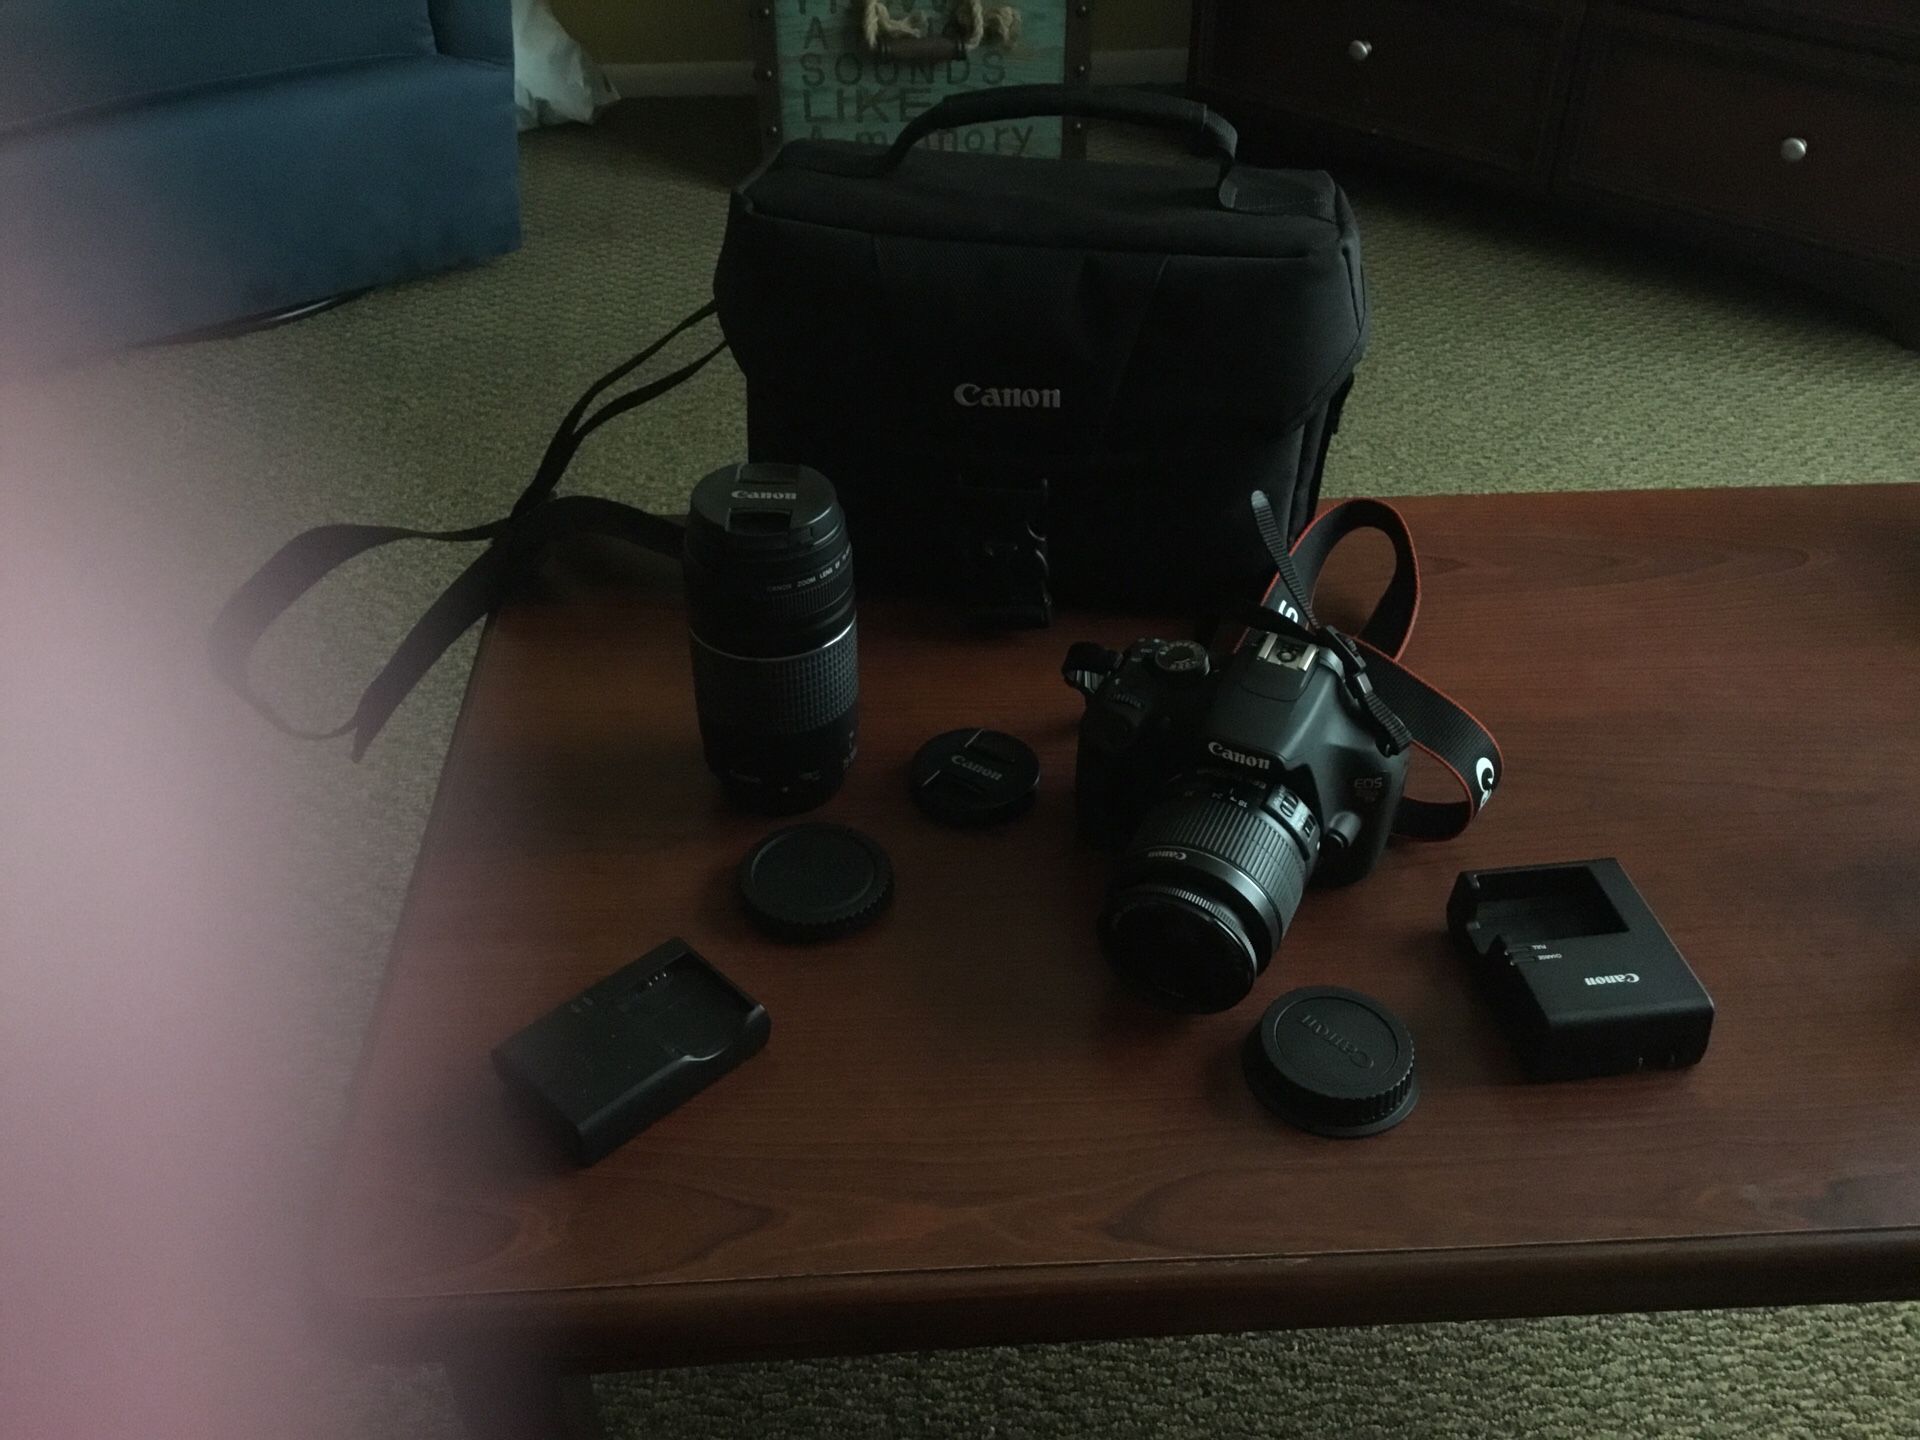 Canon REBEL T5 EOS CAMERA , TWO LENSES , TWO CHARGERS , STRAP, BAG, ALL IN PERFECT WORKING ORDER